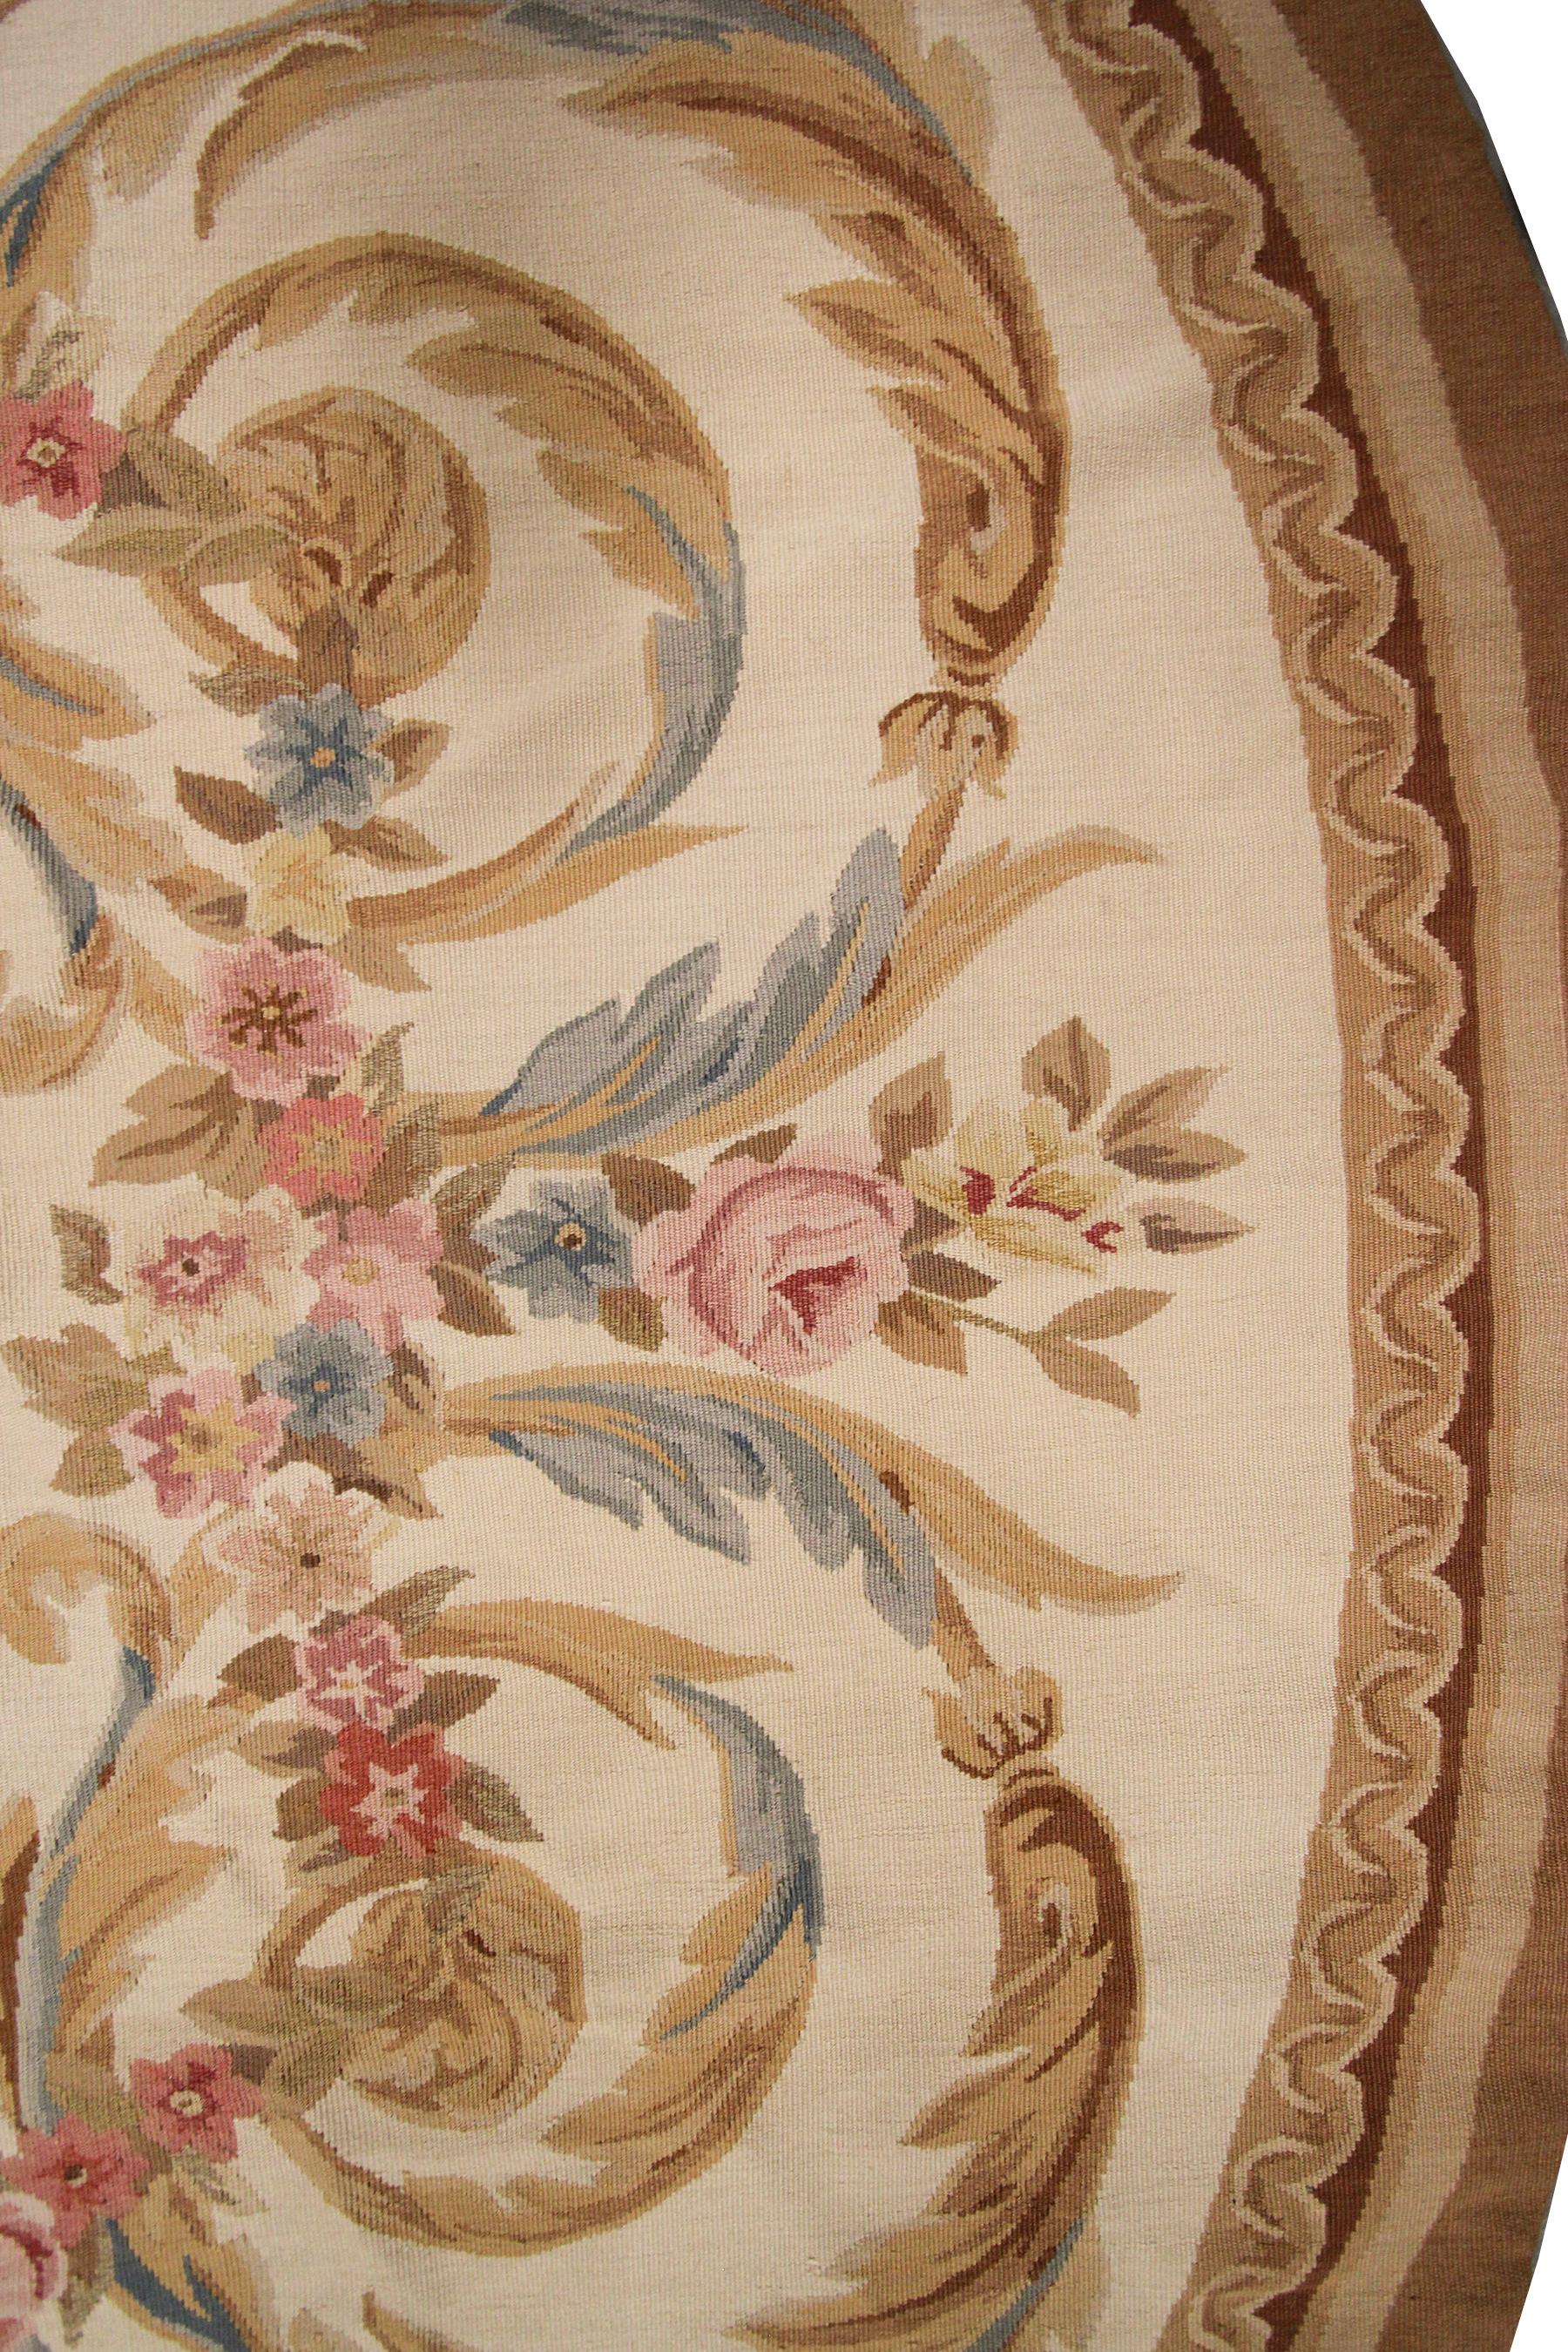 Antique French Aubusson Rug Hand Woven Aubusson Rug 8x8 Round Rug 244cm x 244cm For Sale 1